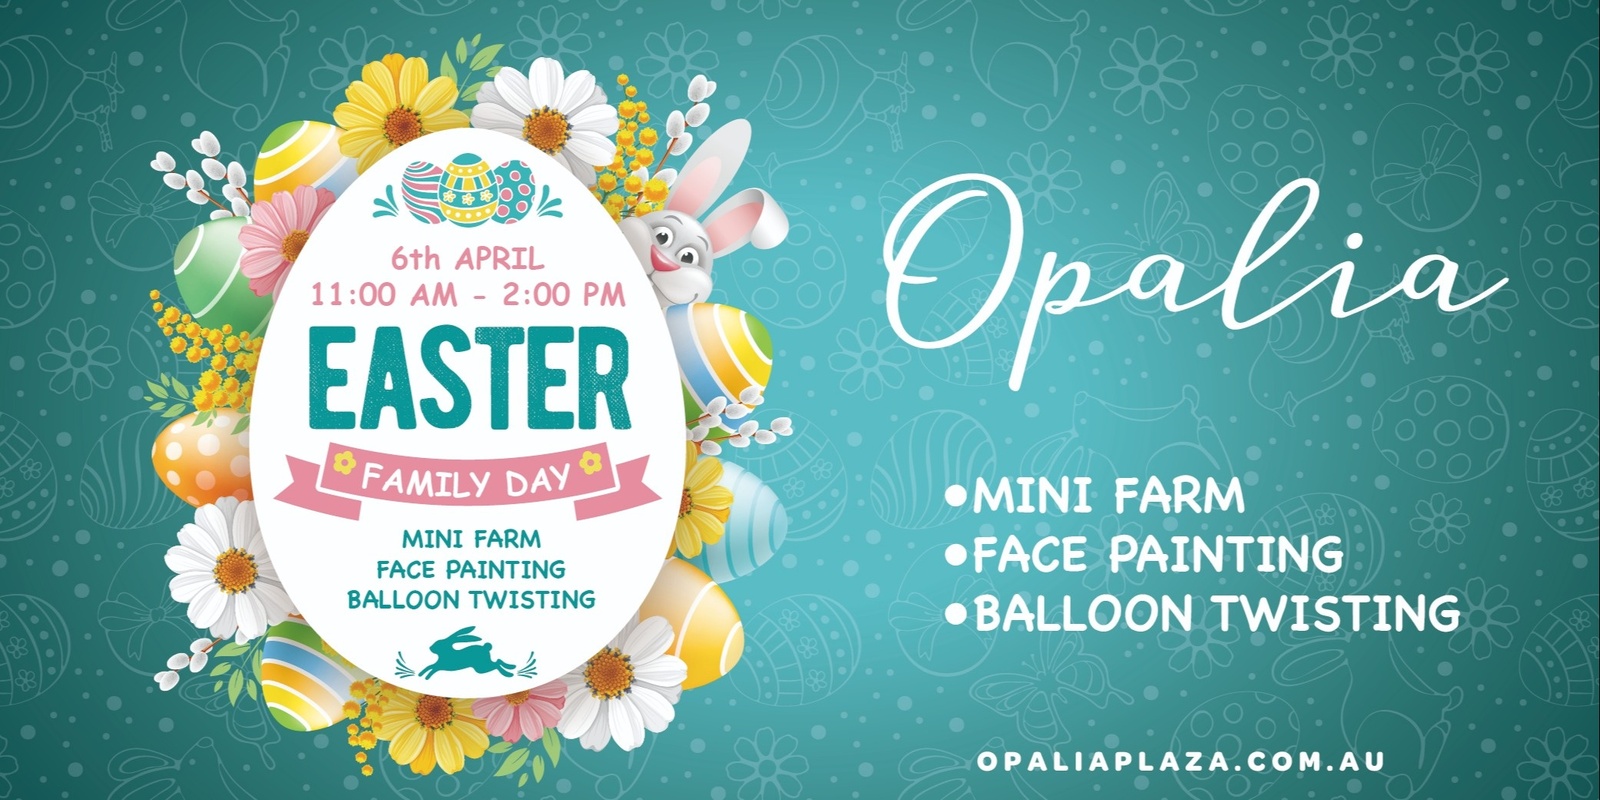 Banner image for Opalia Plaza Easter Family Day